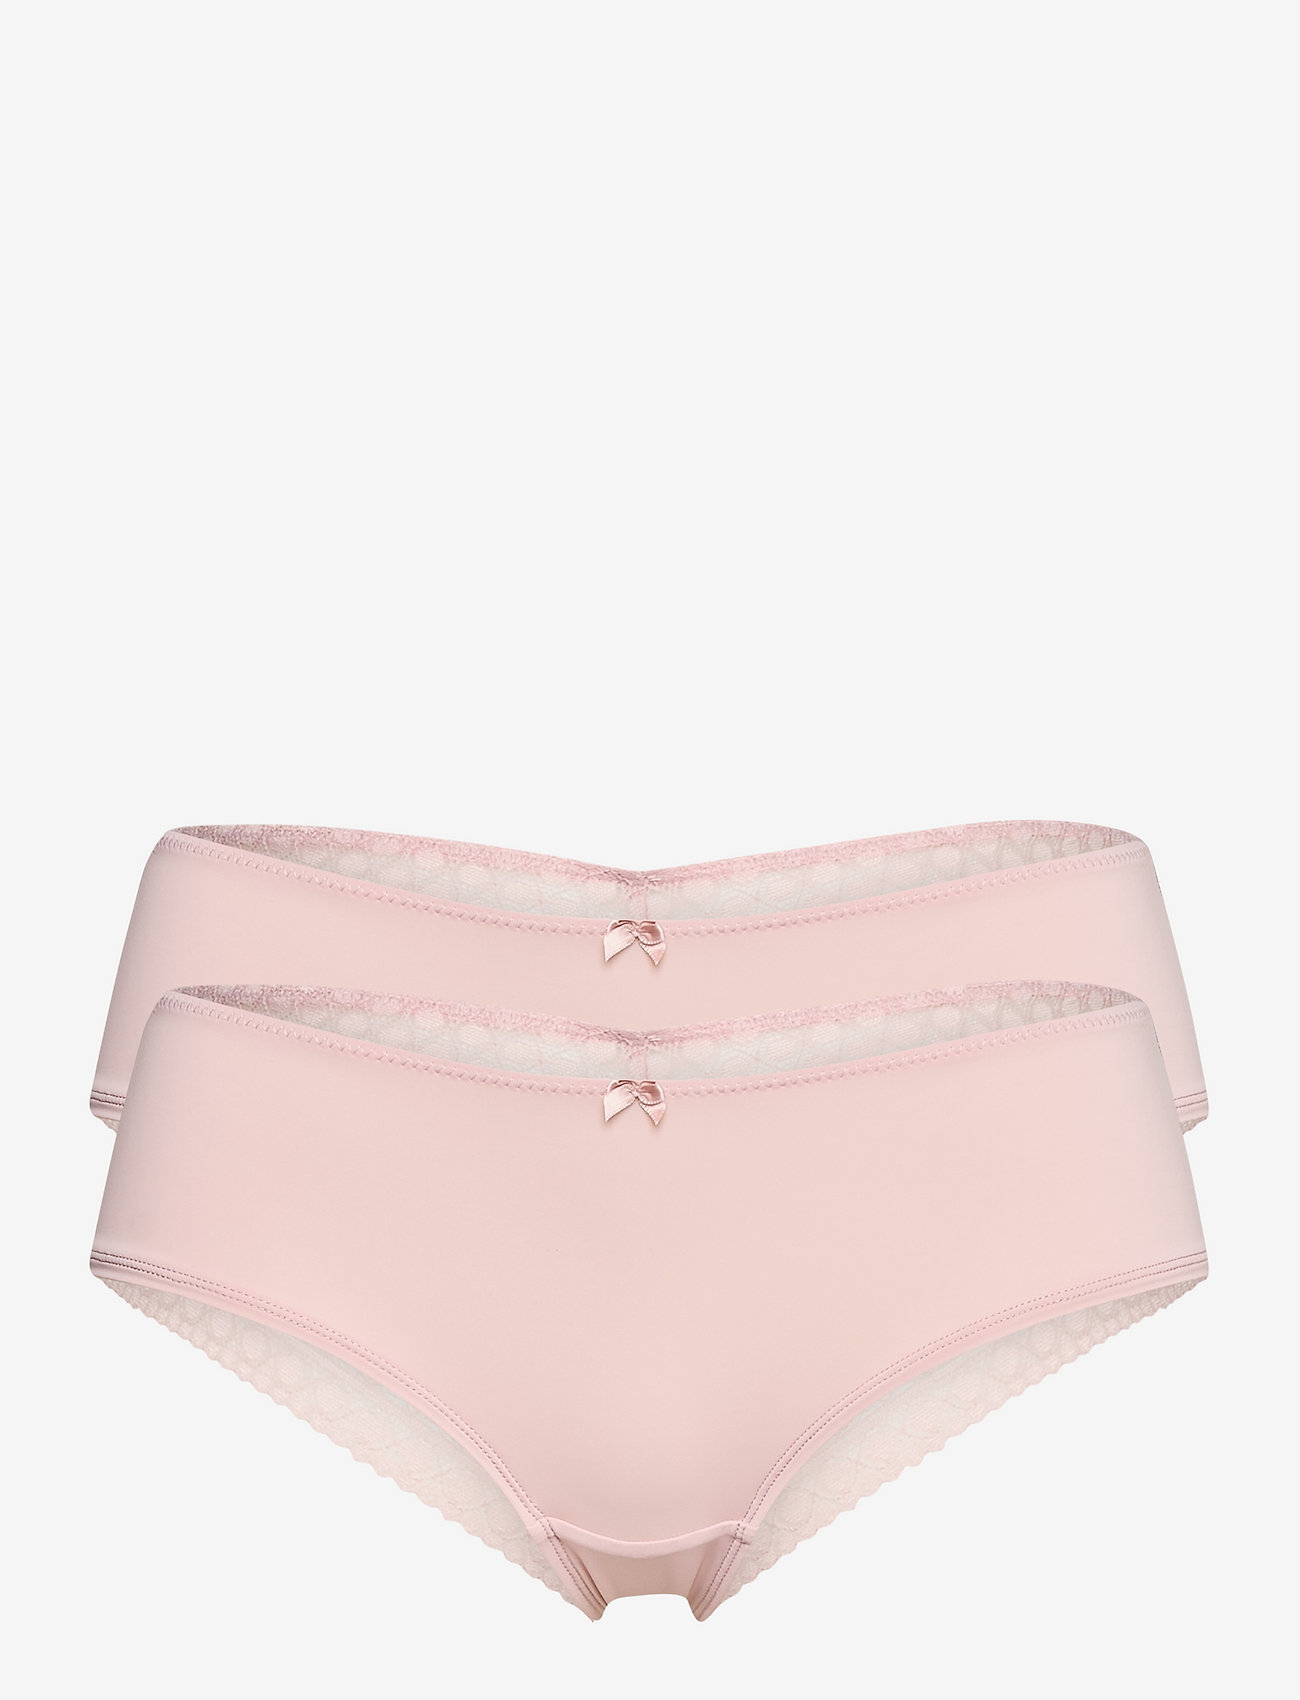 Esprit Bodywear Women - Double pack: Brazilian hipster shorts trimmed with lace - briefs - old pink - 0